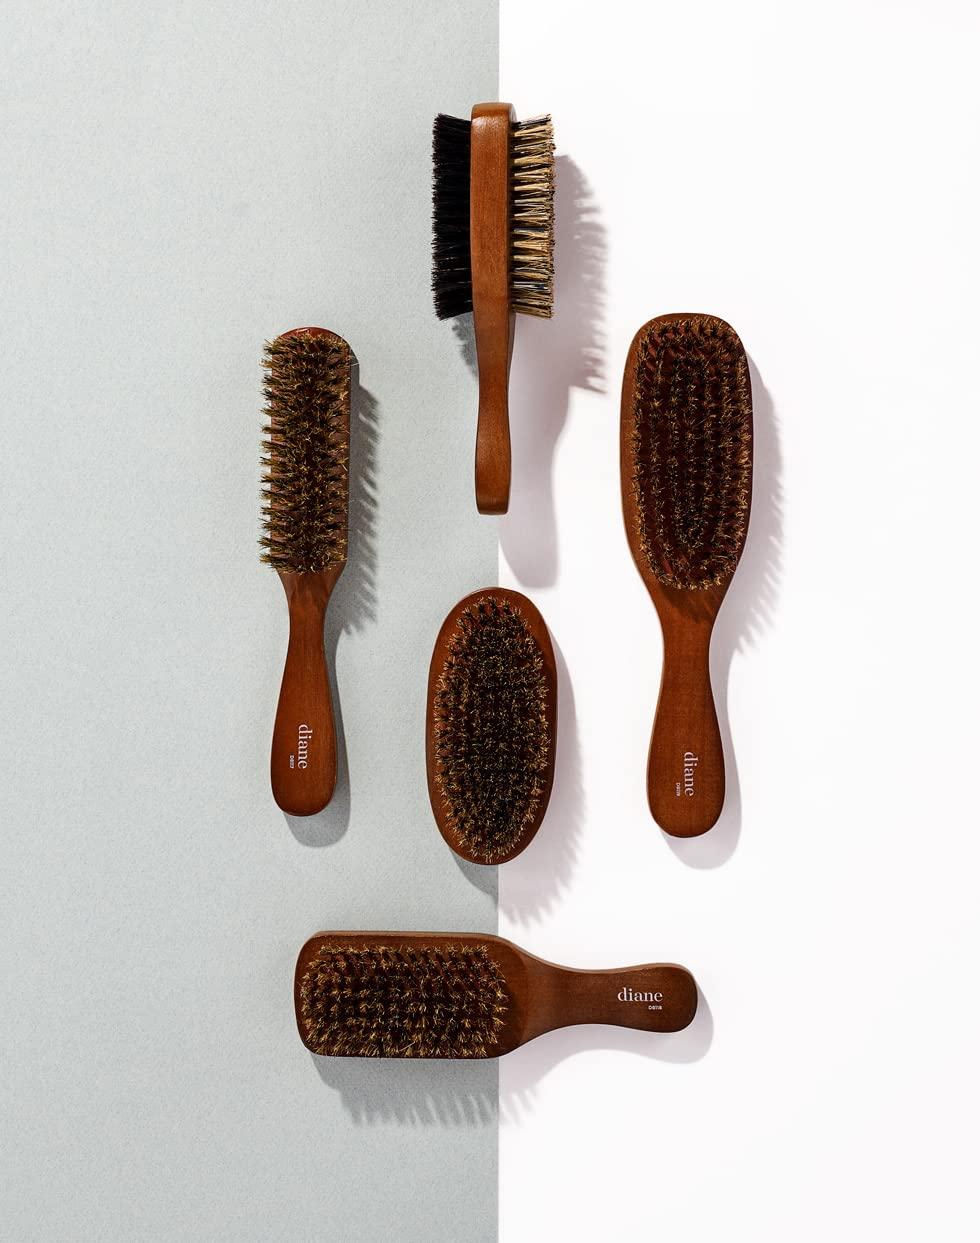 1 Boar Bristle Wave Brush Wood Firm Hair Comb Wooden Reinforced Natural Boar, Brown